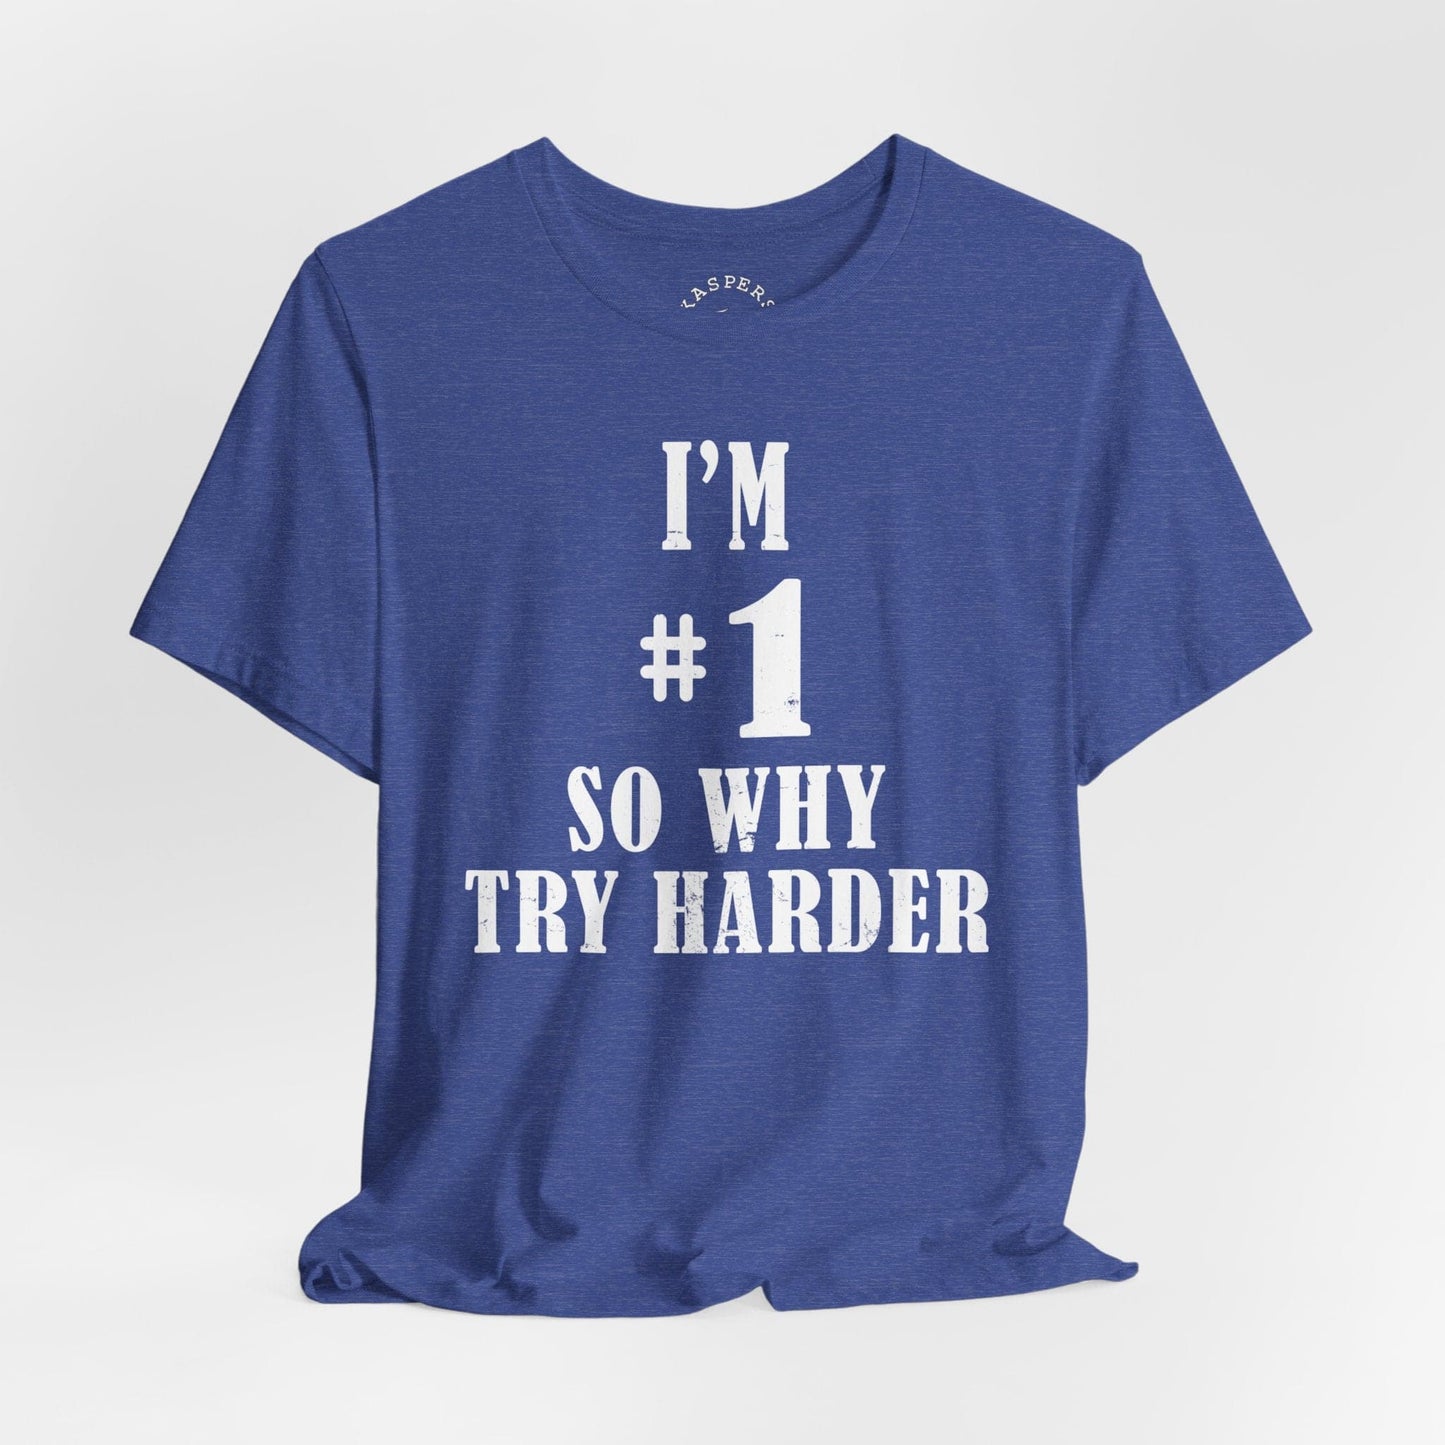 I'm #1 So Why Try Harder T-Shirt